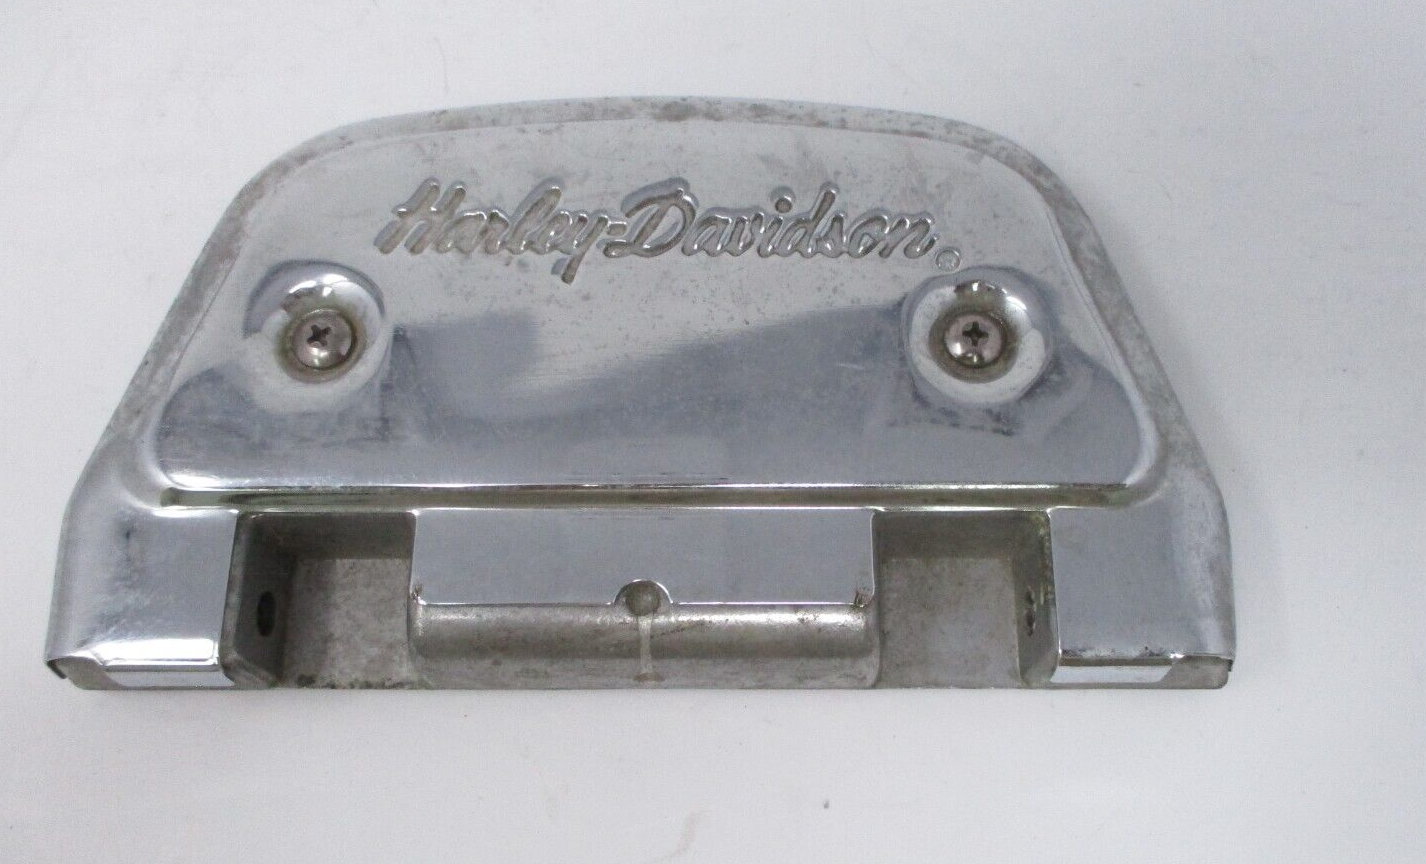 Harley-Davidson  Passenger Footboards with Pad and Script Cover  50613-91